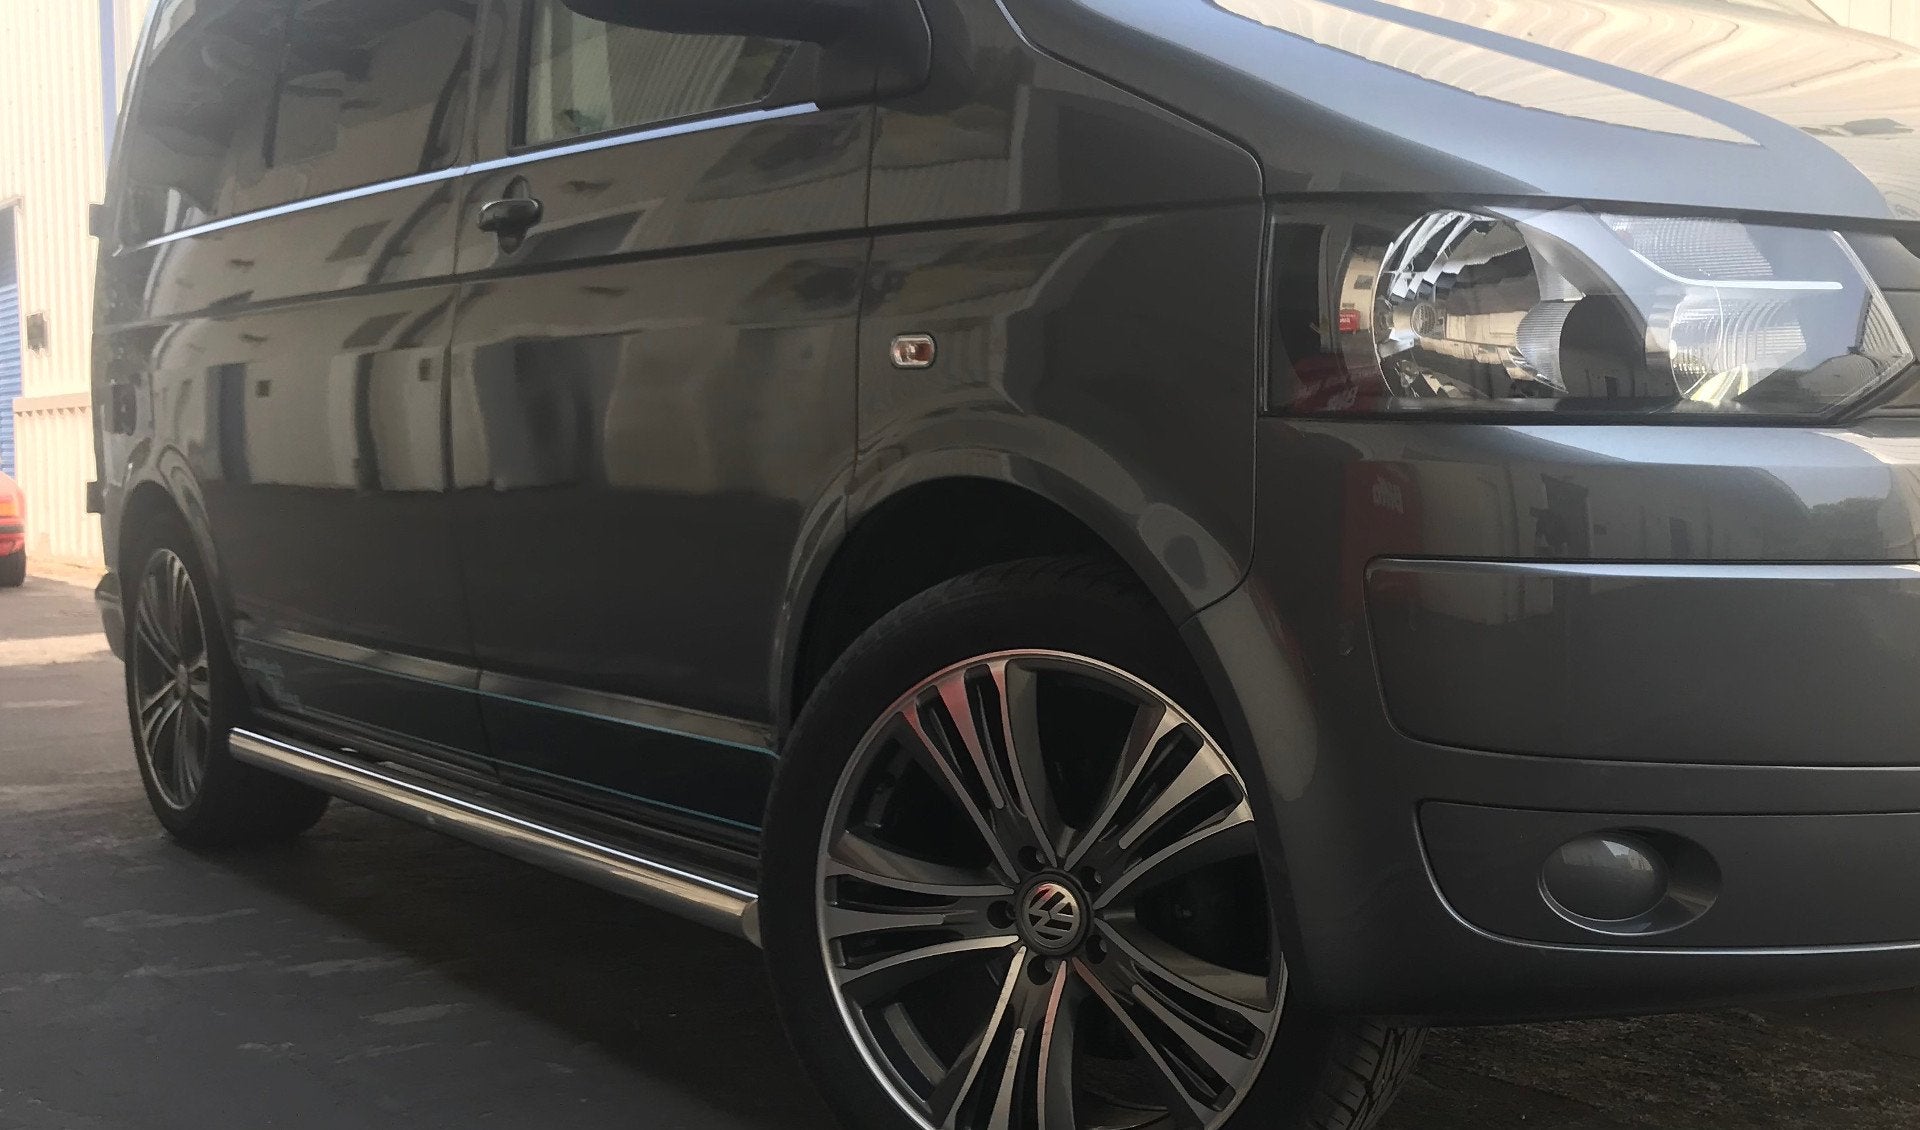 Stainless Steel Side Bars for Volkswagen Transporter T6 SWB -  - sold by Direct4x4